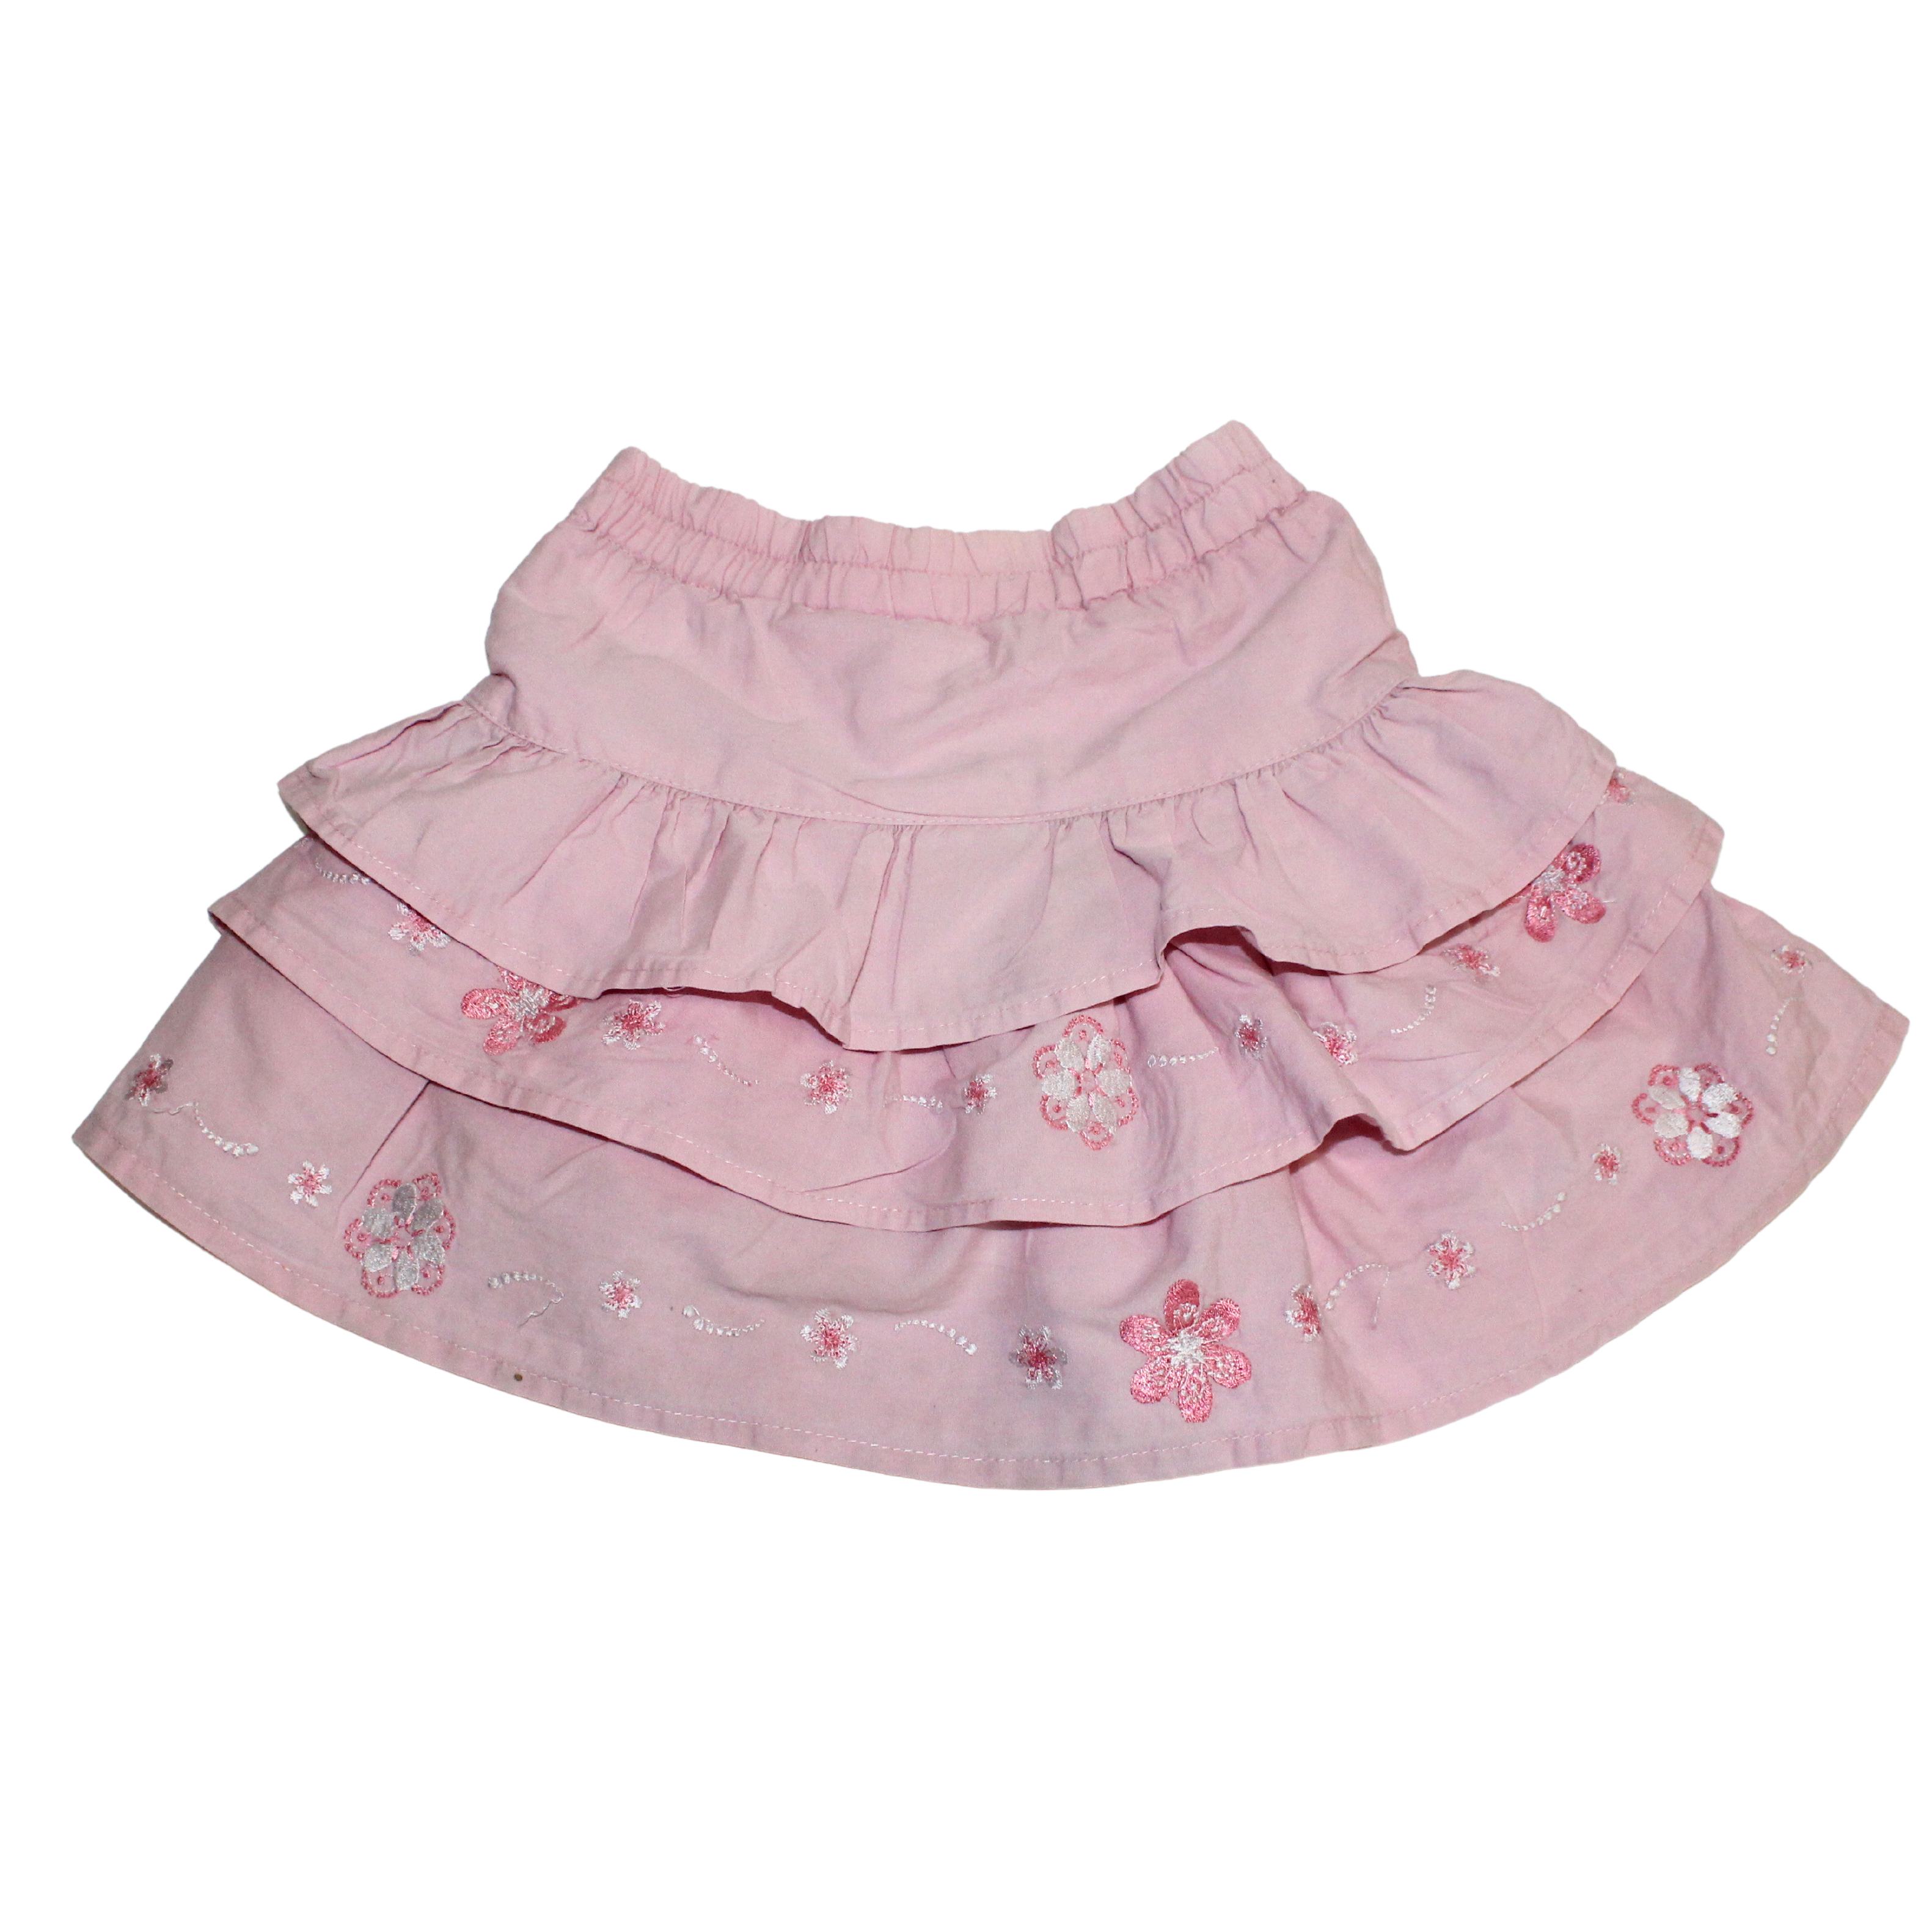 Pink Tiered Skirt